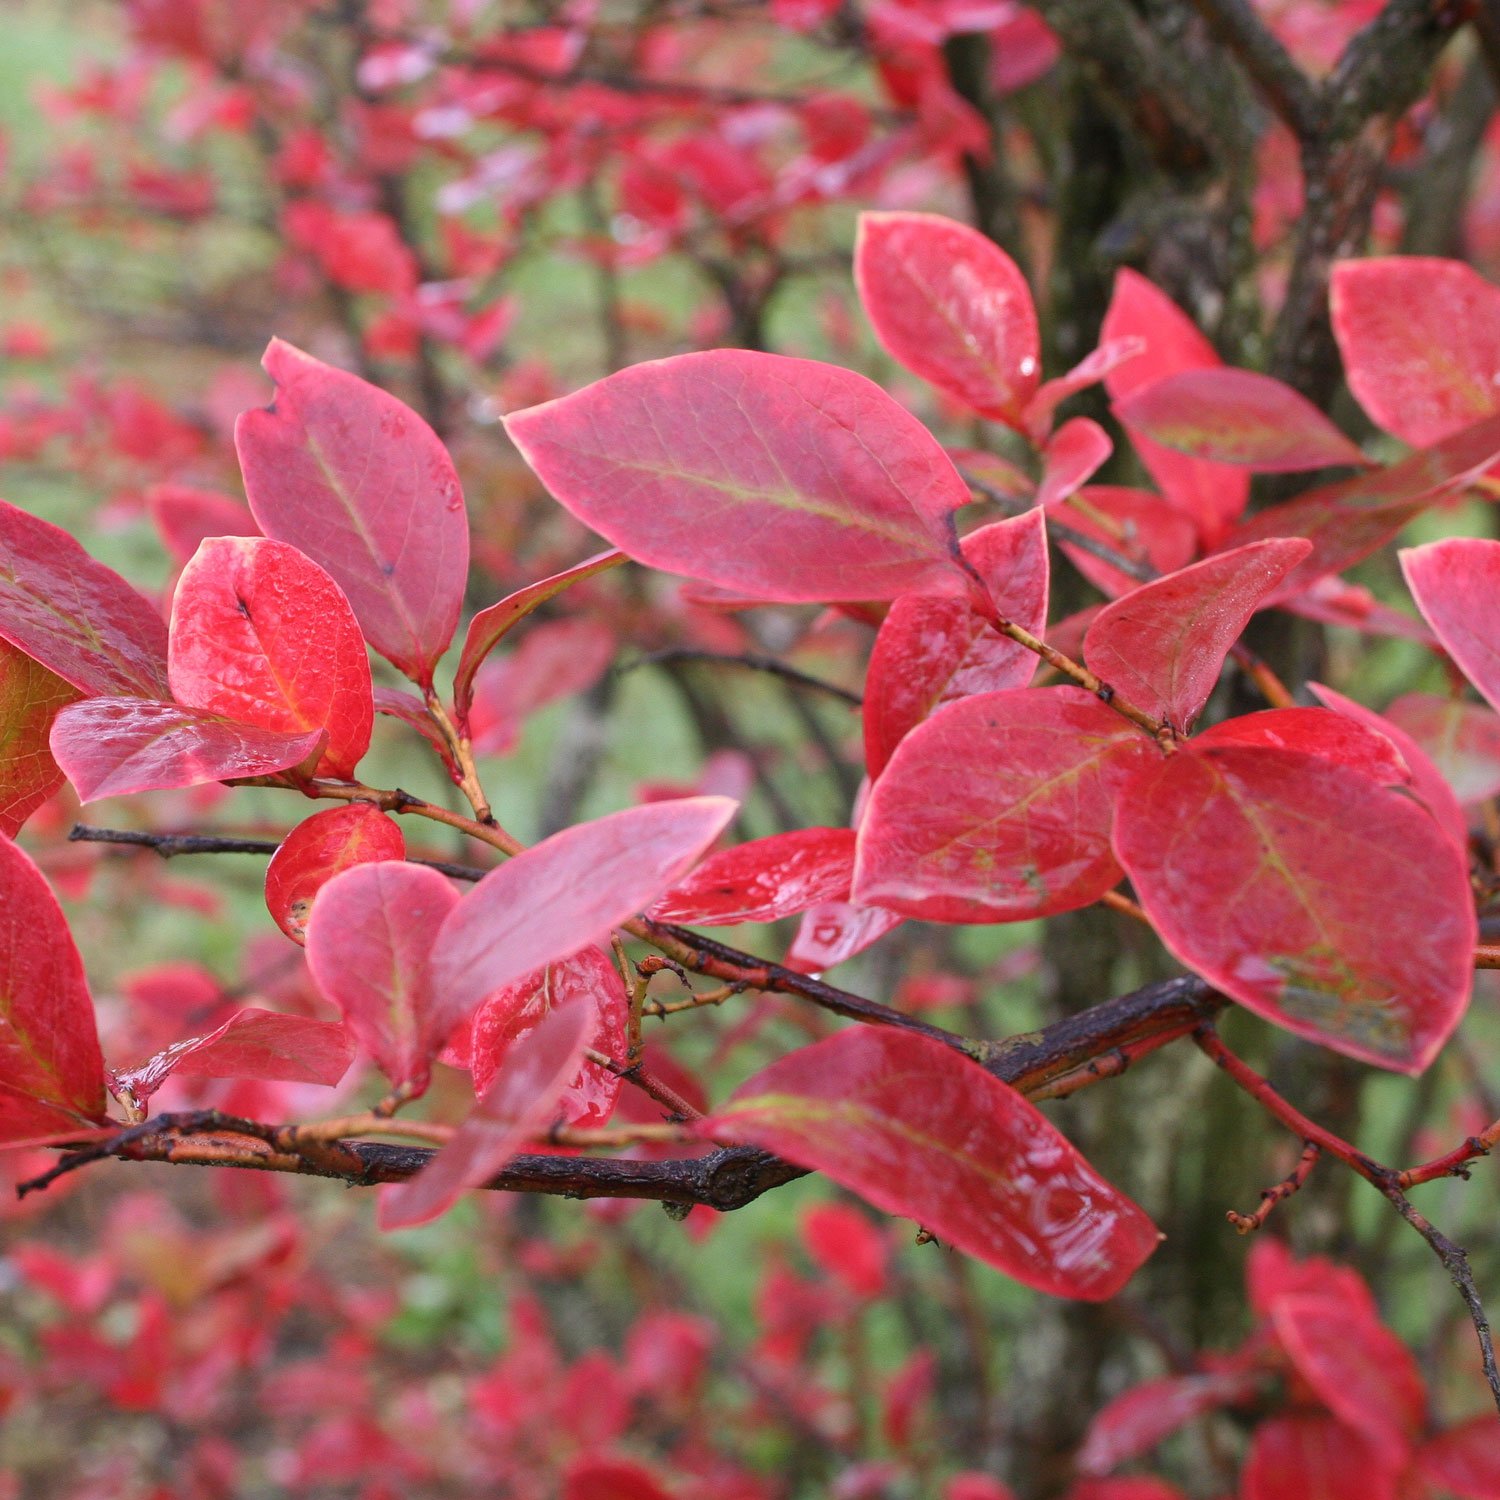 Trees and Shrubs with Colorful Fruit in Fall and Winter